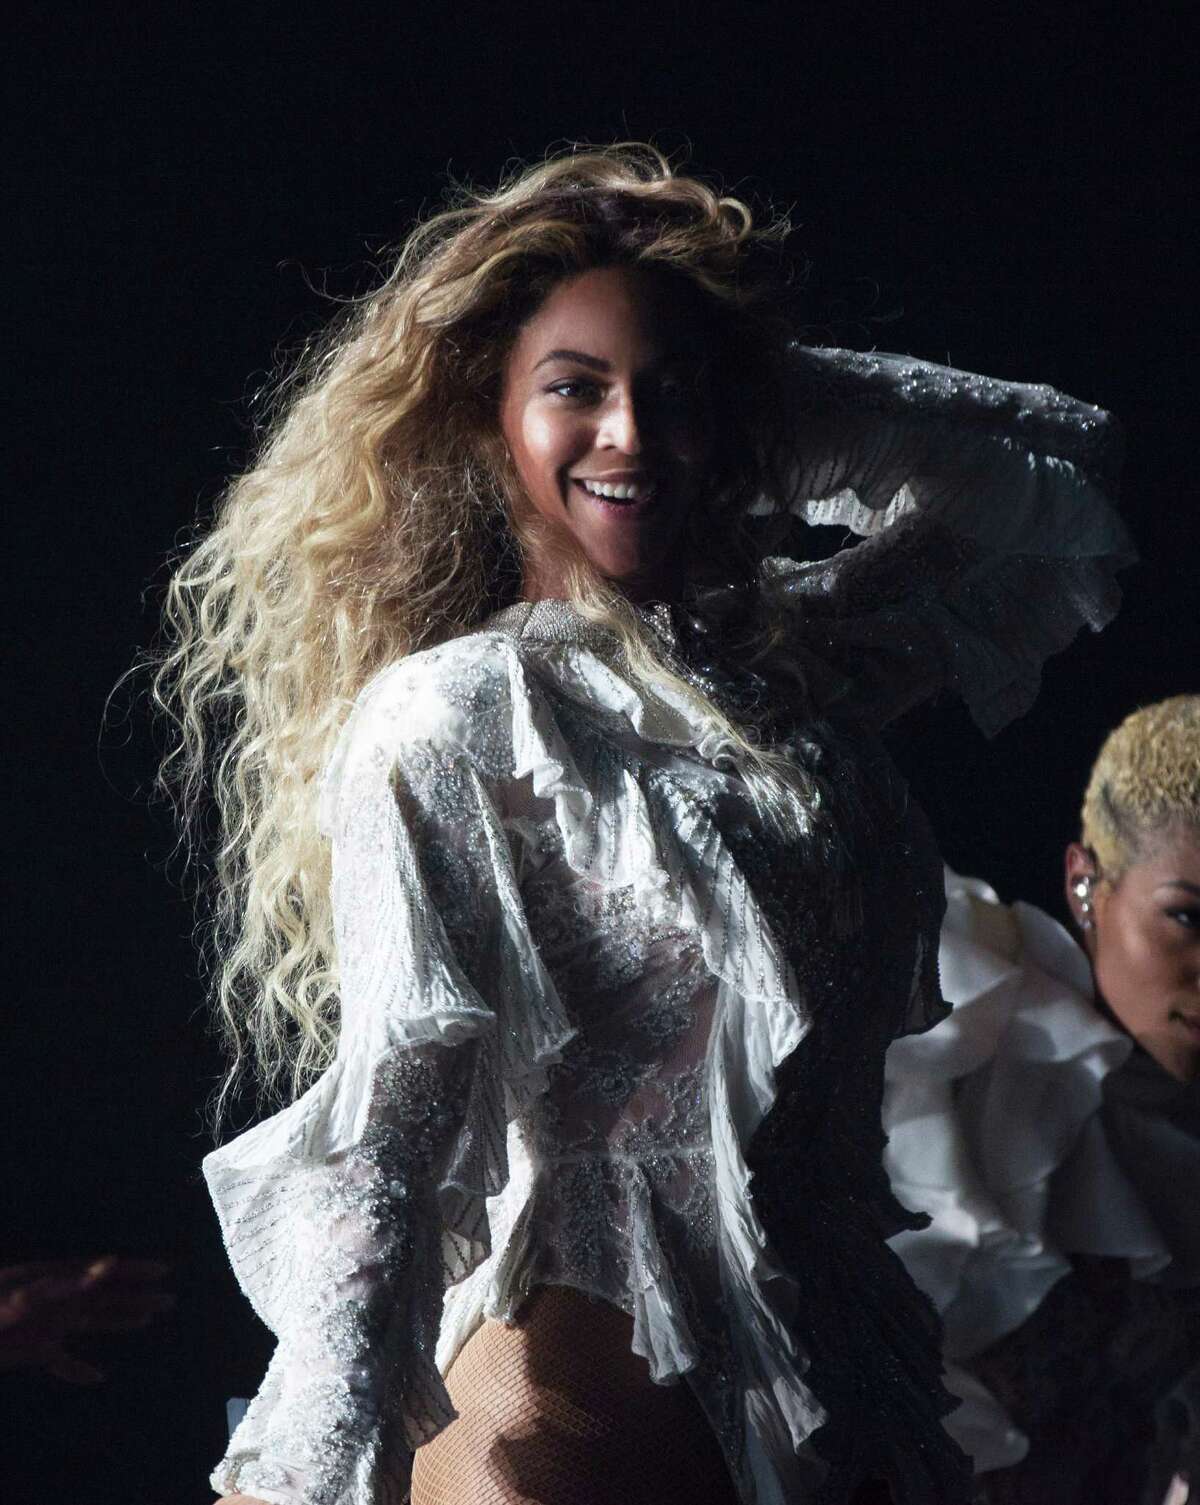 ﻿Beyoncé﻿ has earned praise from female country artists for her emphasis on the feminine perspecitve in her pop songs.